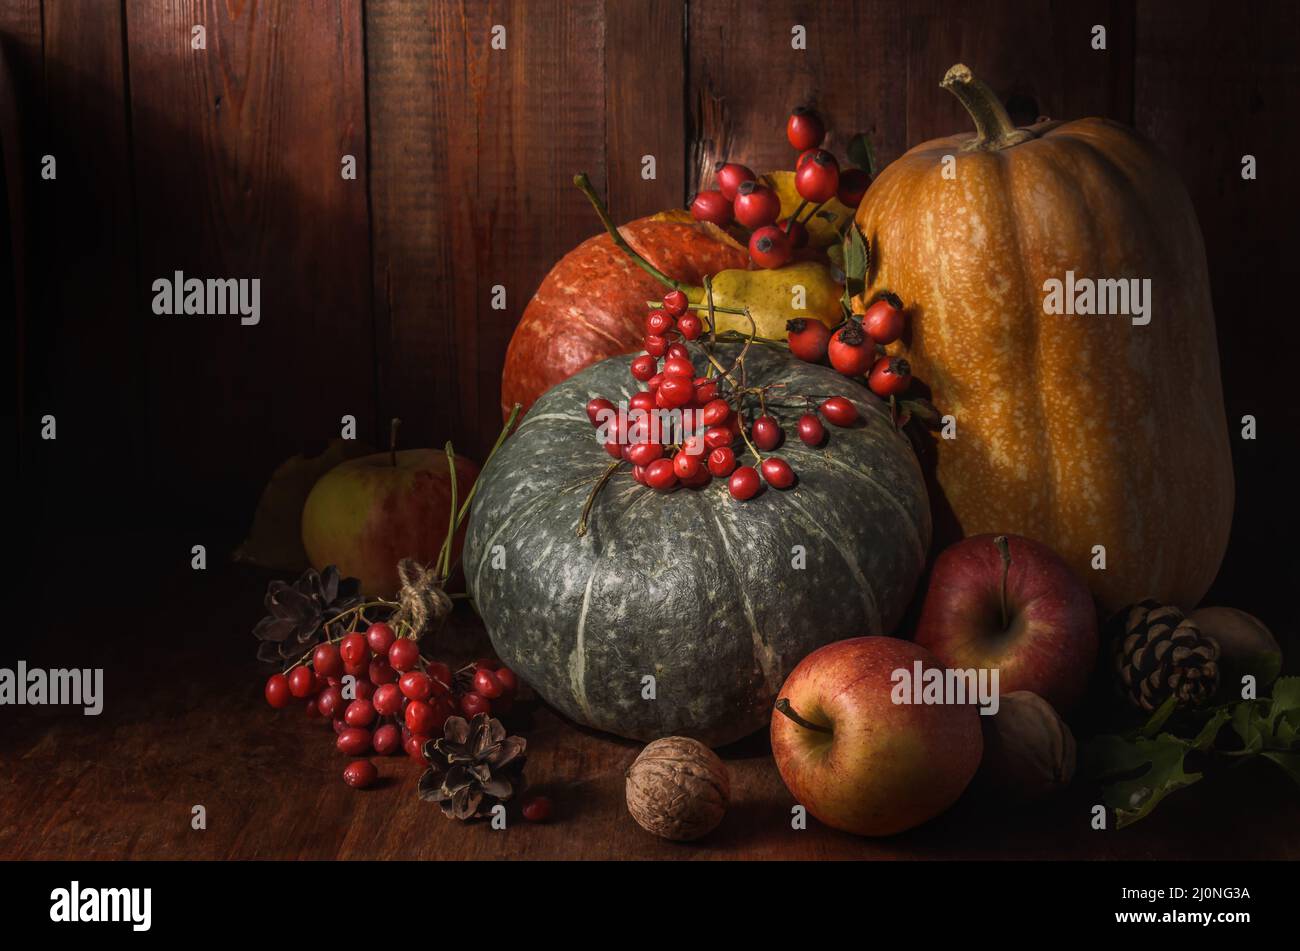 Pumpkin and other fruits on a dark wooden background in a rustic style Stock Photo